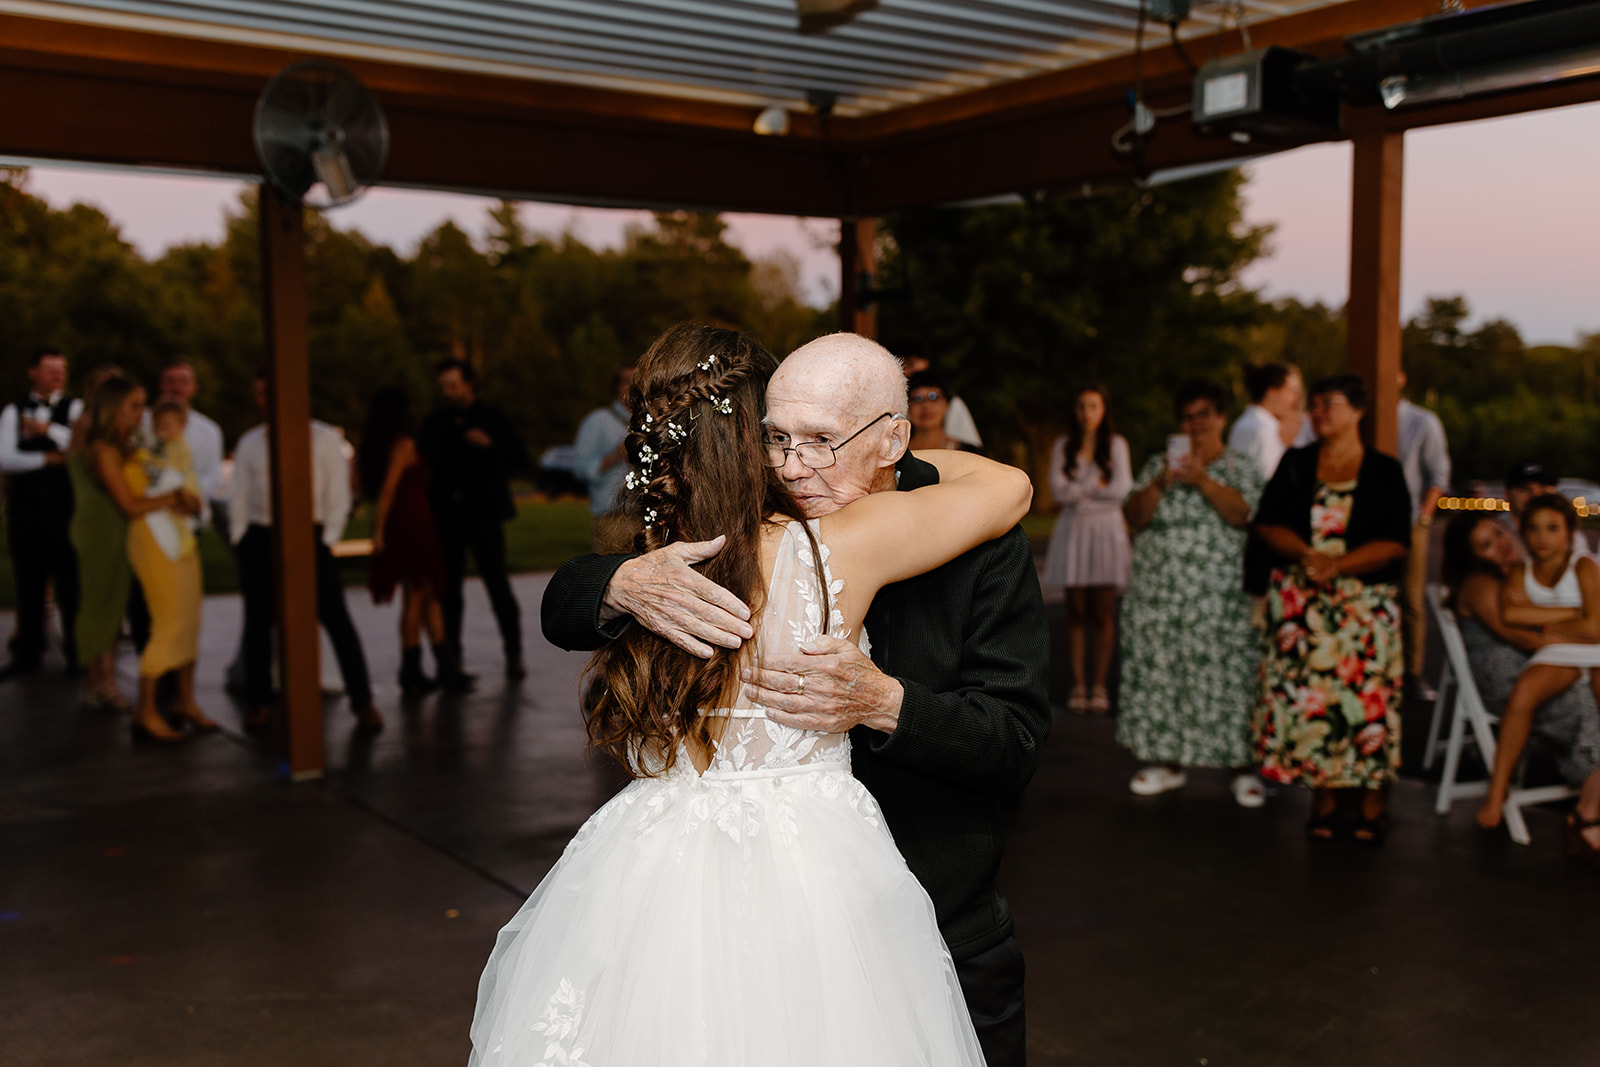 Bride and her grandfather share a hug